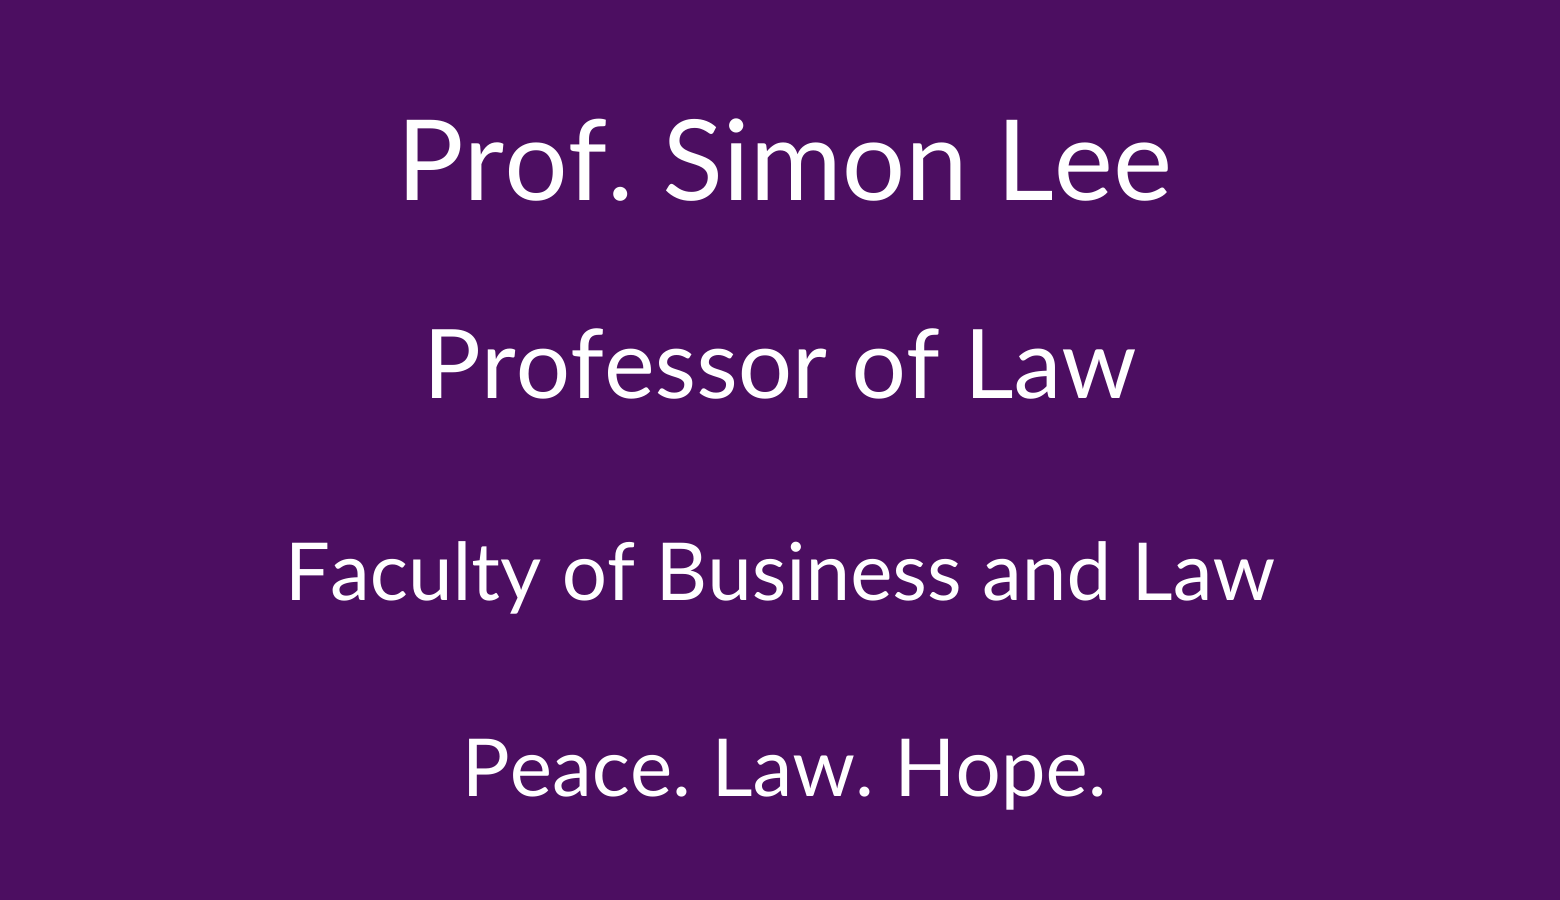 Professor Simon Lee. Professor of Law. Faculty of Business and Law. Peace. Law. Hope